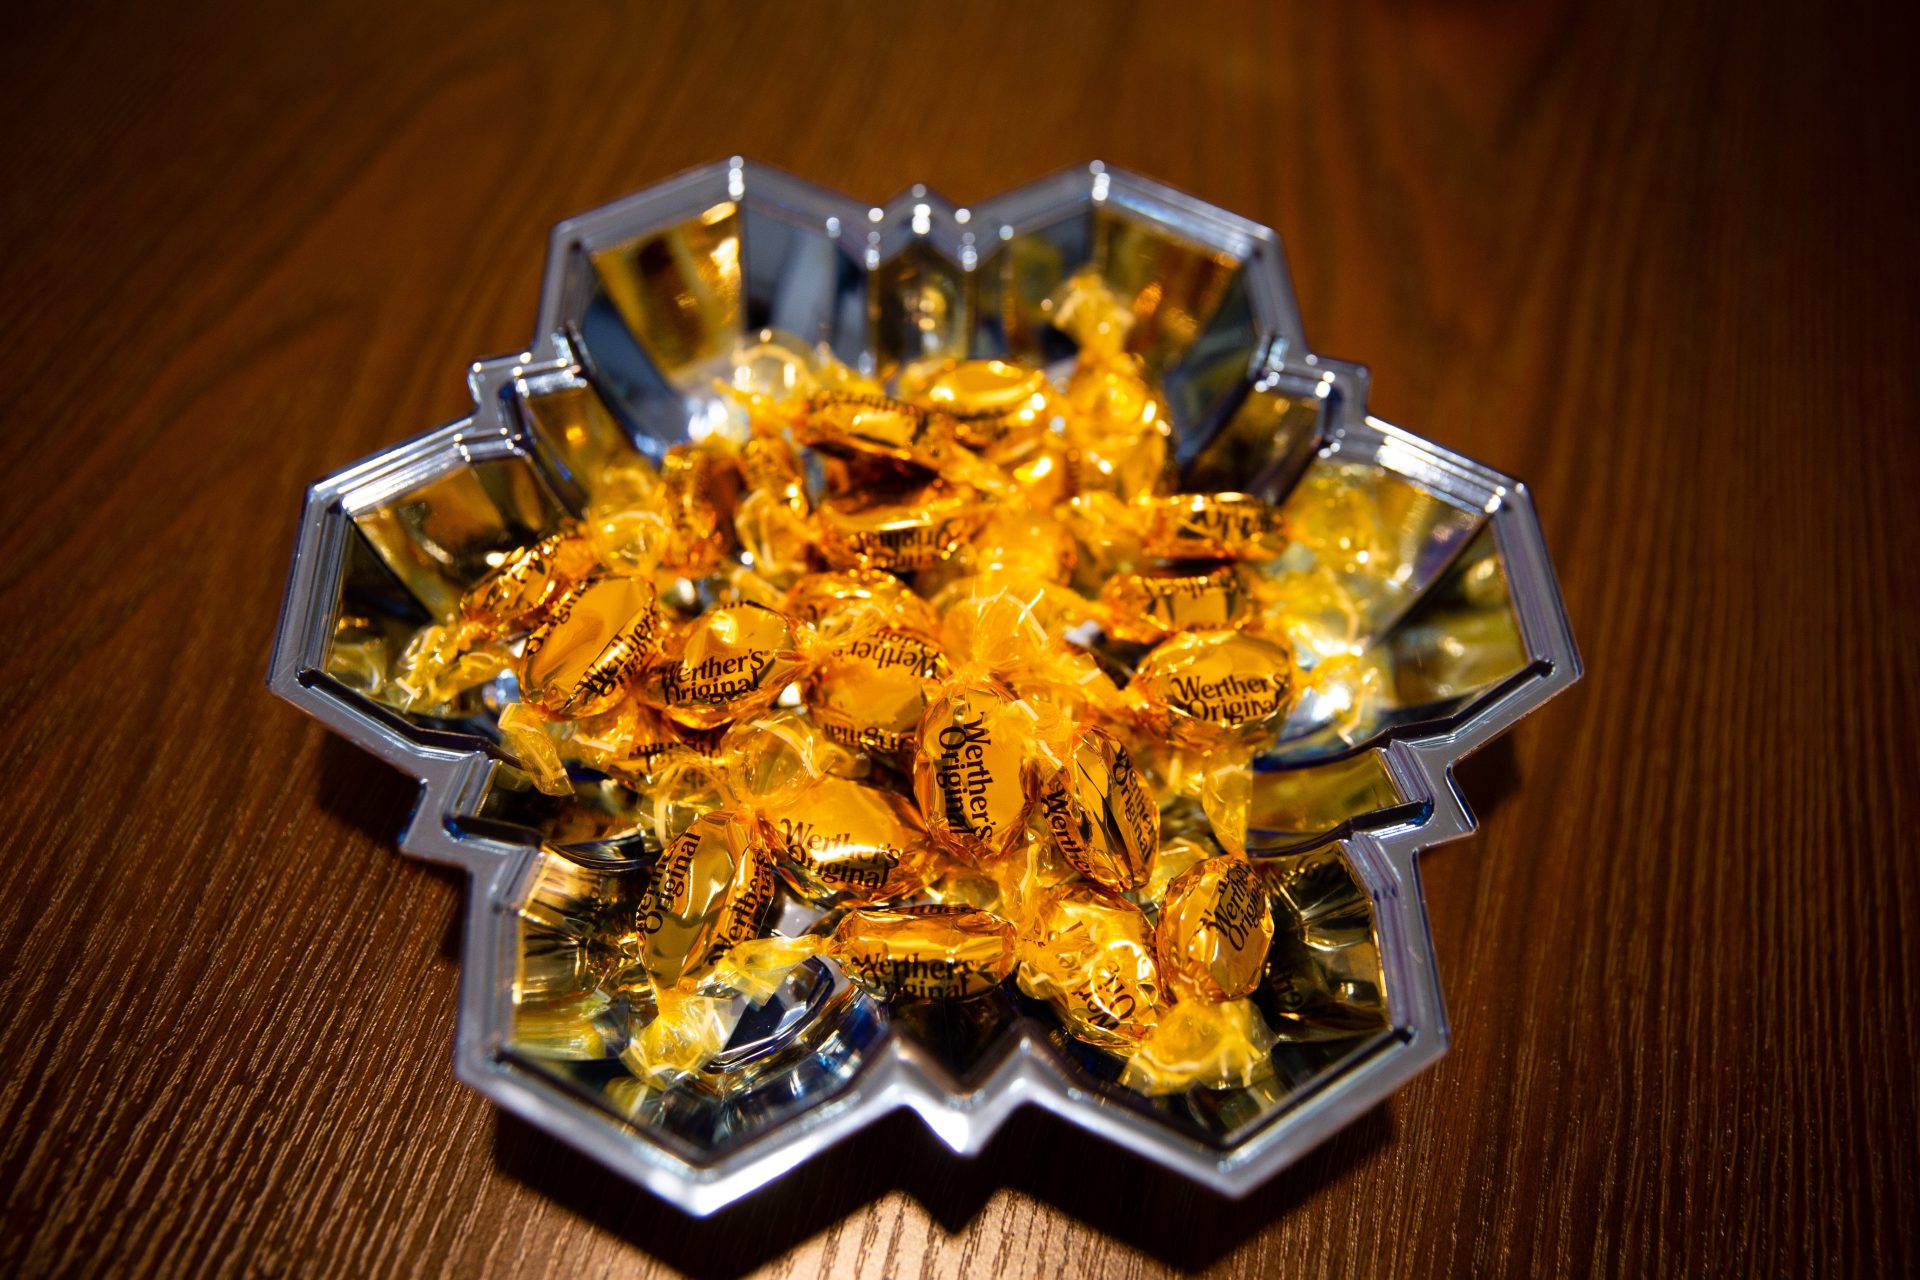 Photo shows a snowflake tray full of caramel candies.